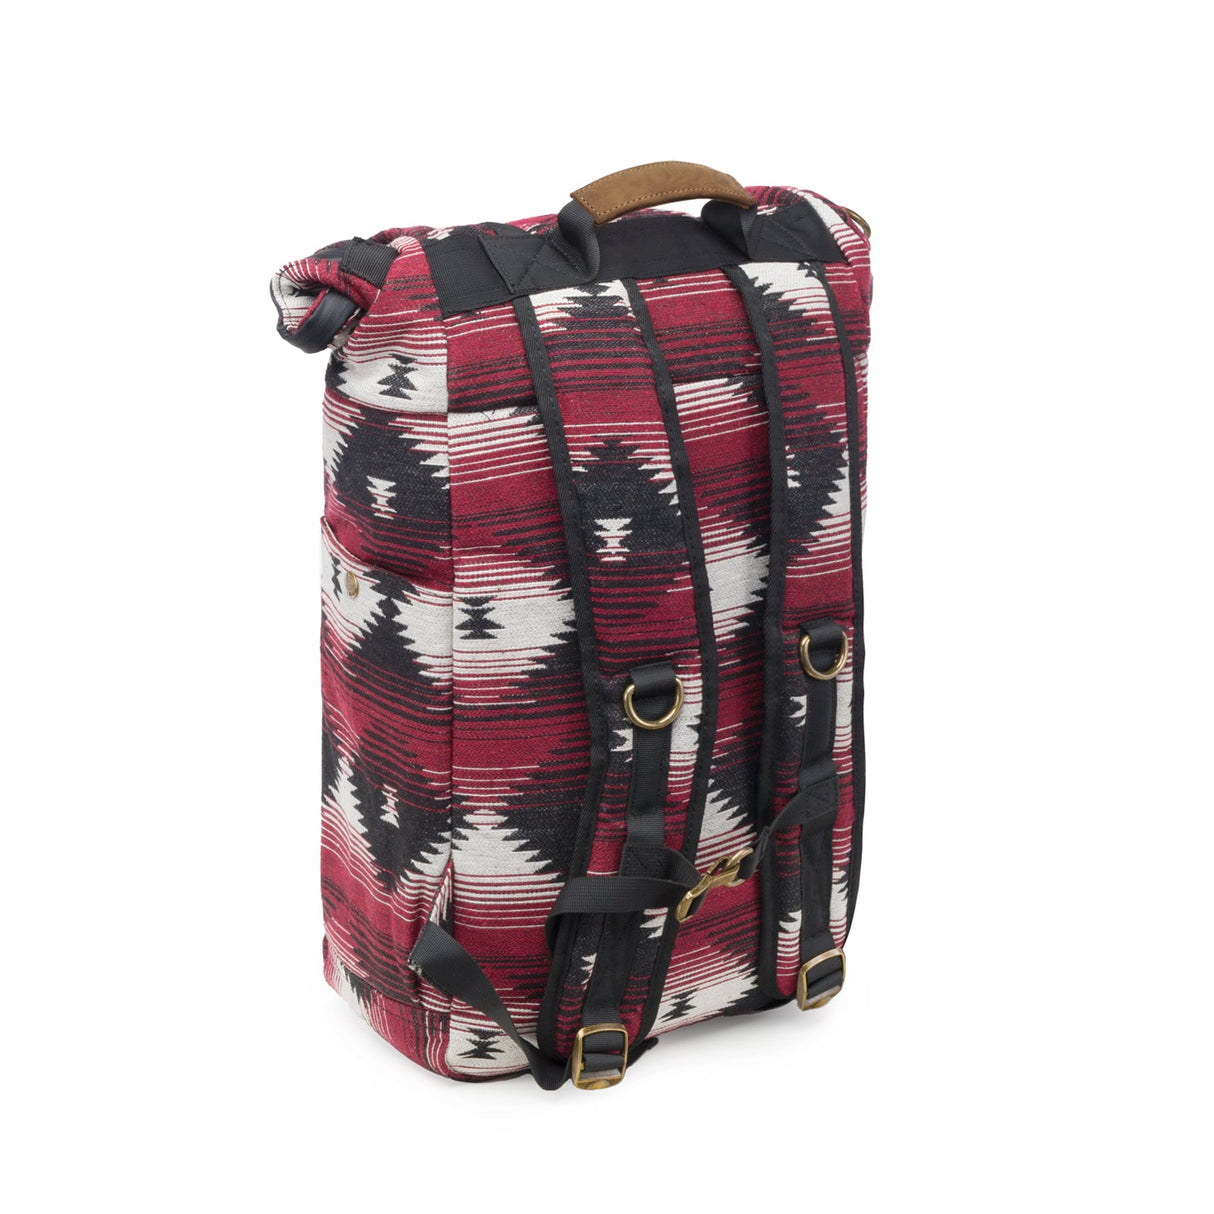 Revelry Supply The Drifter - Smell Proof Rolltop Backpack with red plaid design, side view